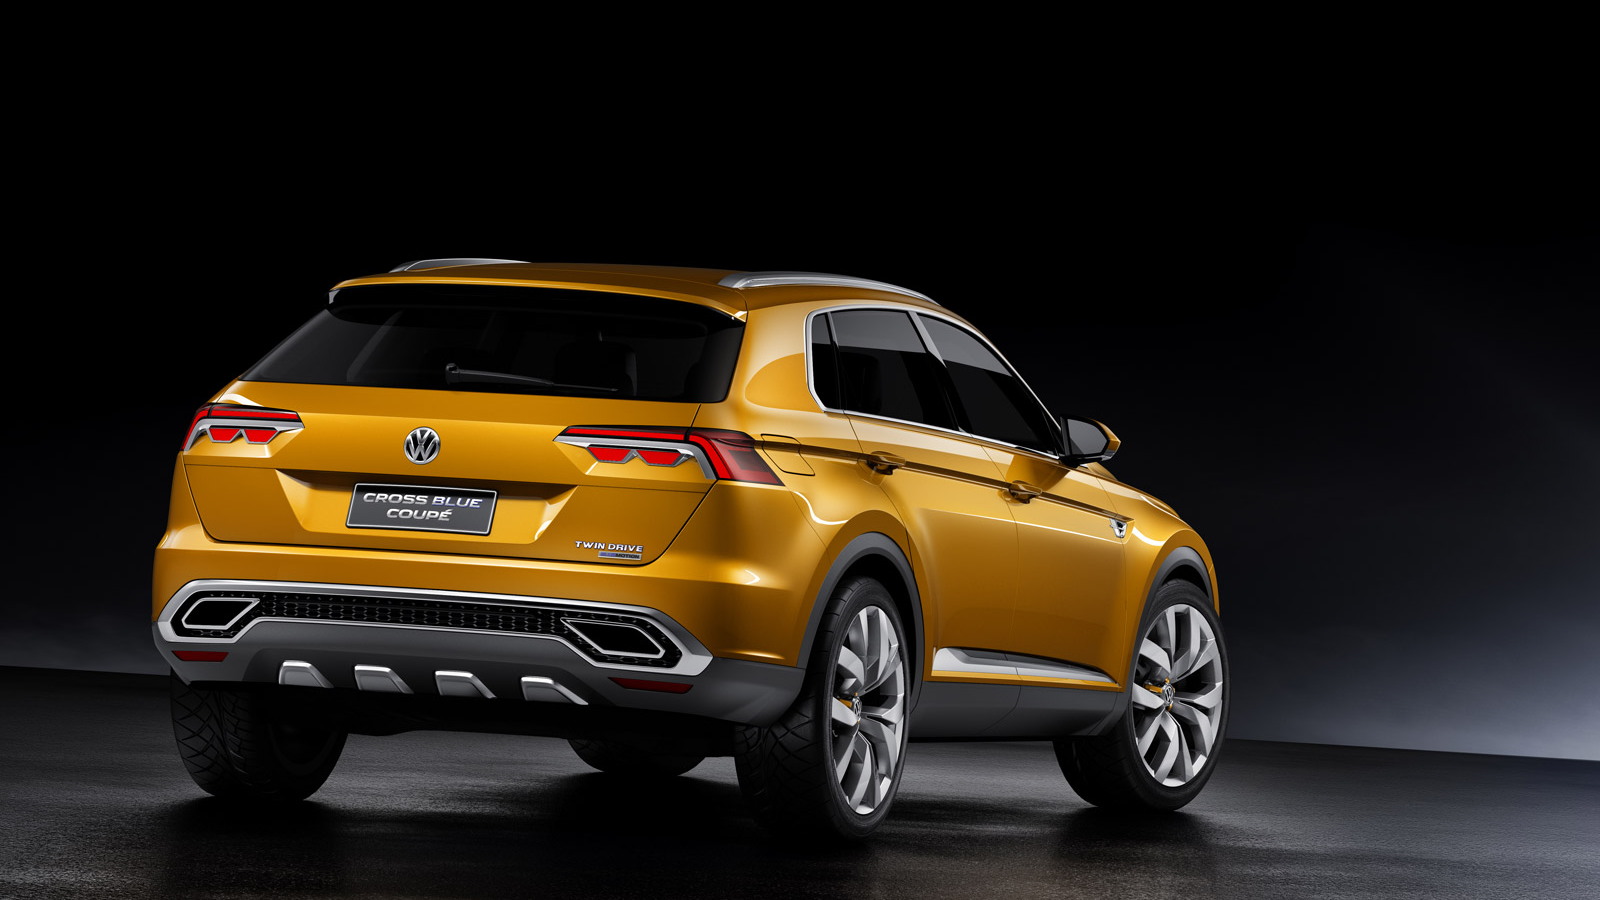 Volkswagen CrossBlue Coupe concept